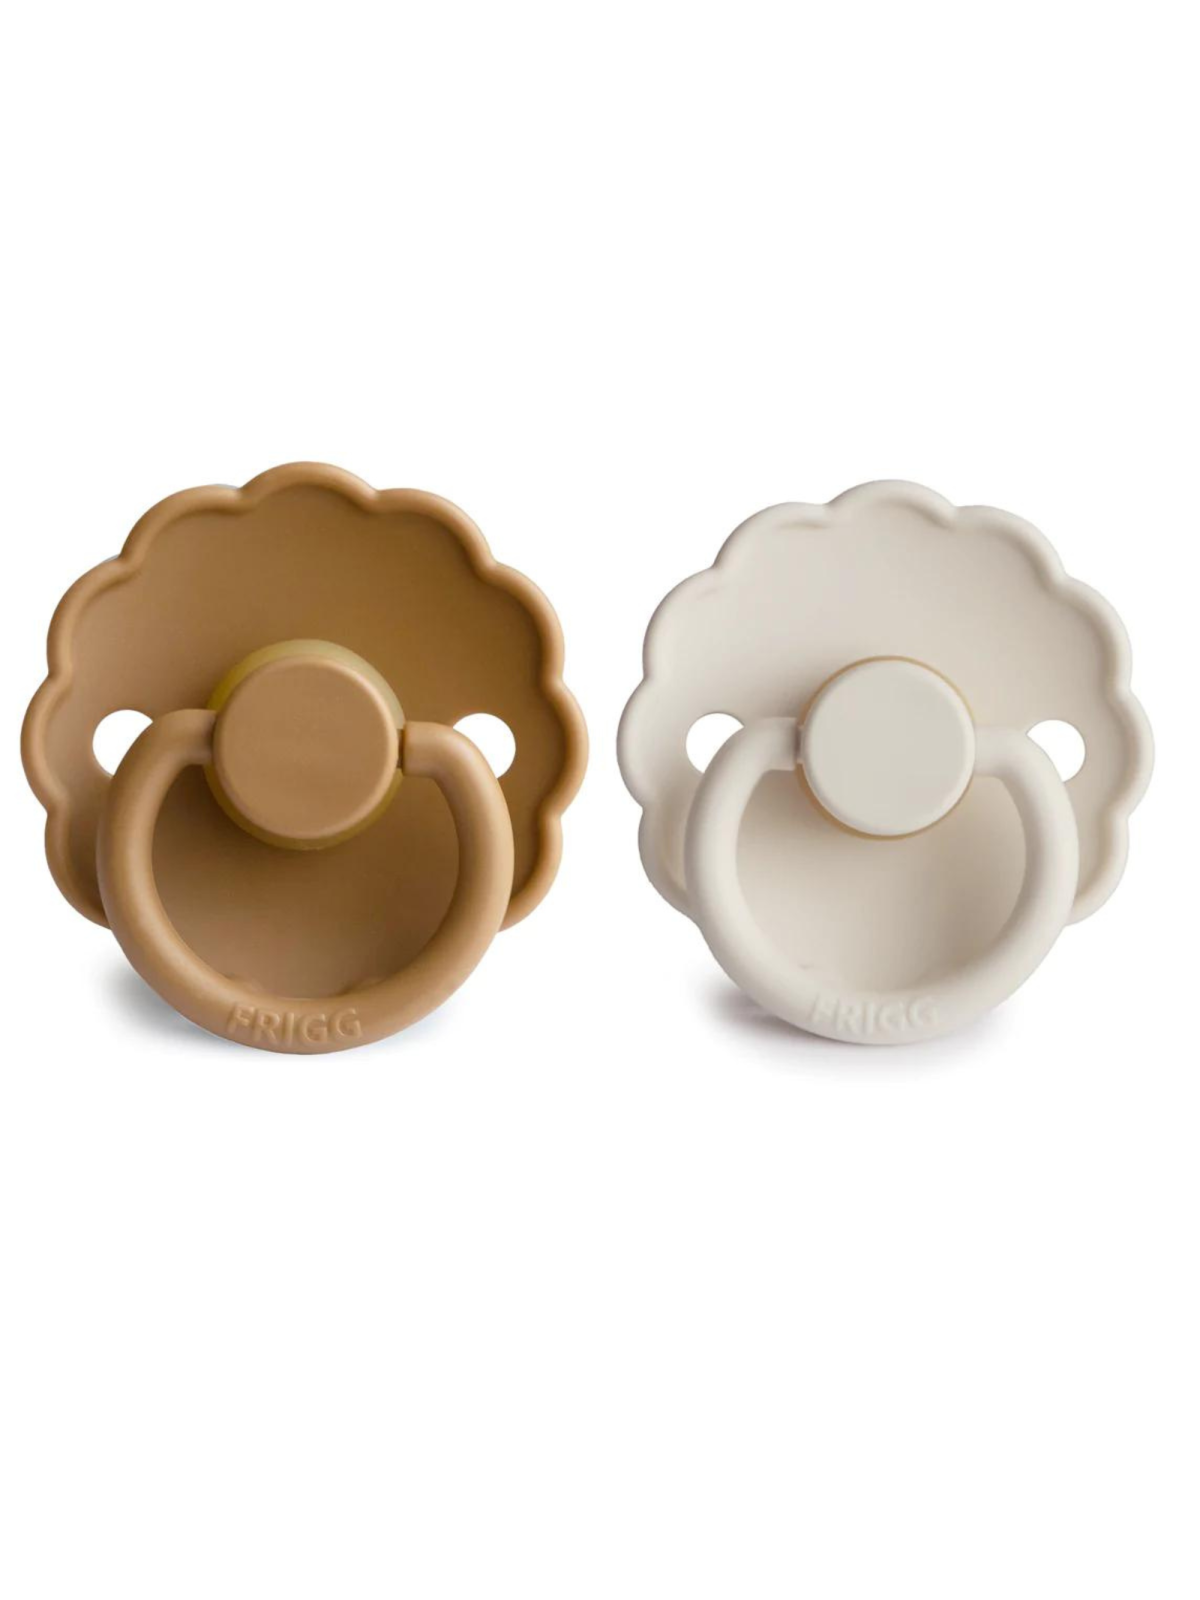 Daisy Natural Rubber Pacifier 2-Pack, Cream/Cappuccino